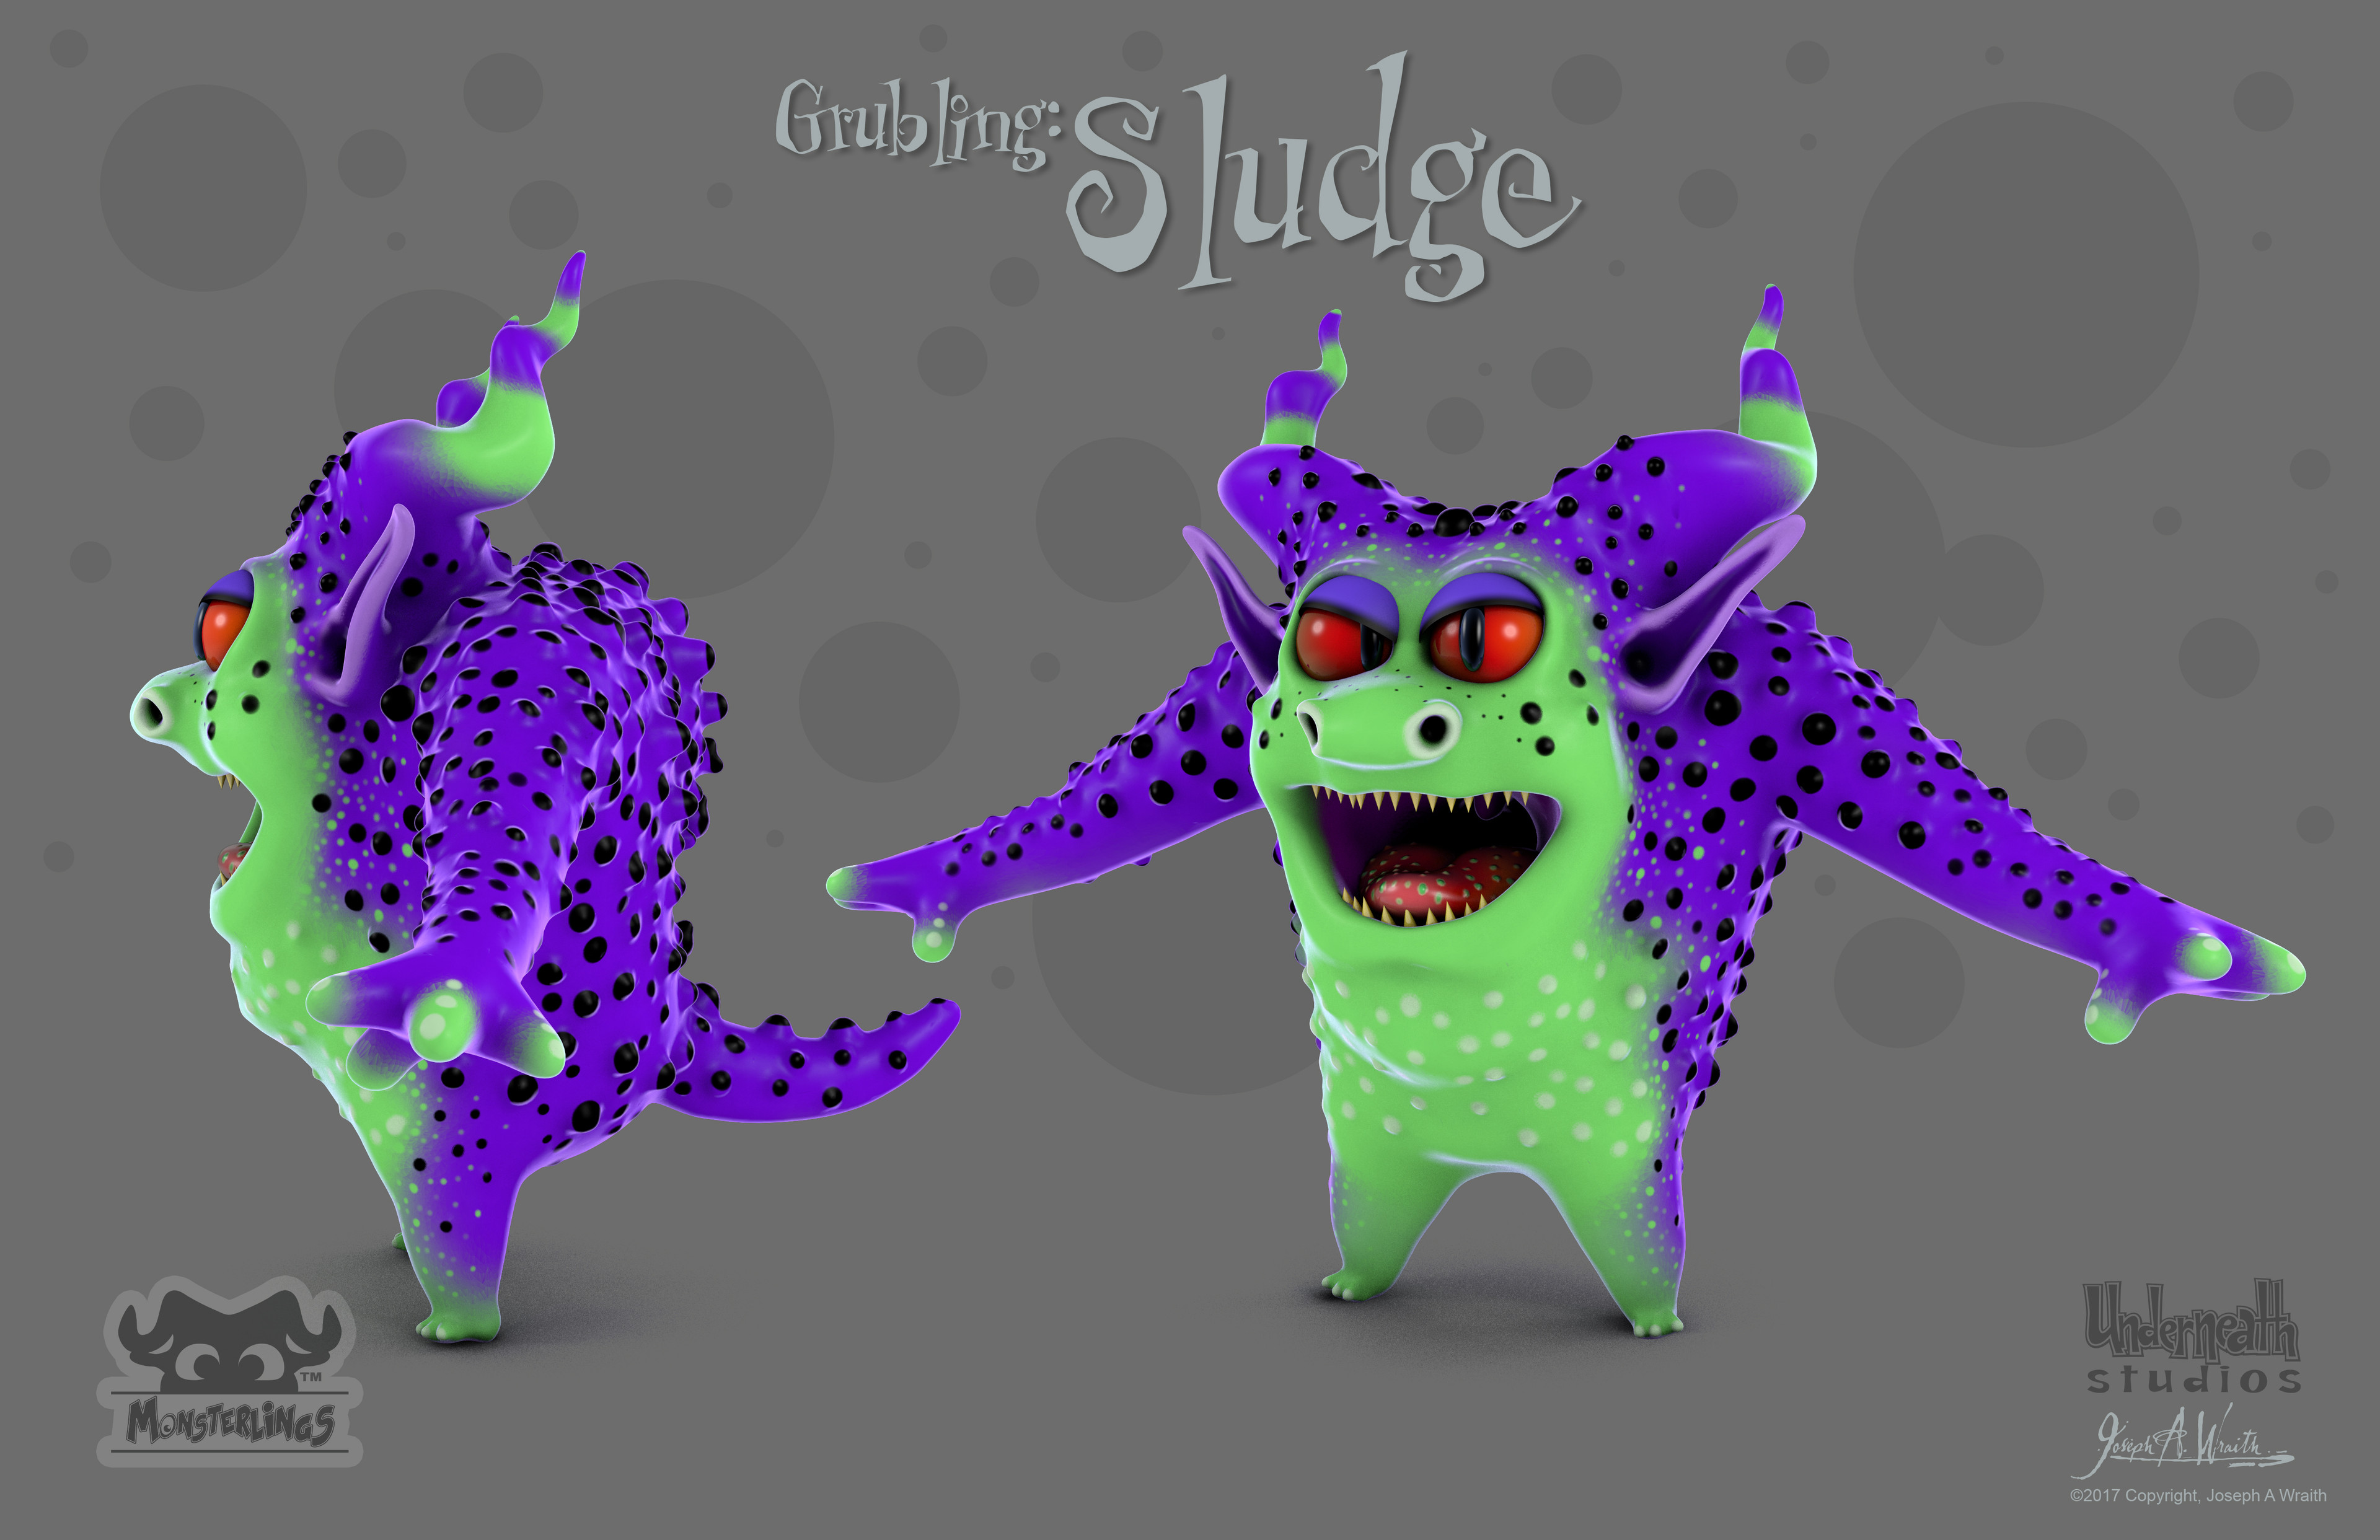  Here is another new Grubling named Sludge, he is one of Raze's henchmen and the muscle behind his dastardly ideas. 